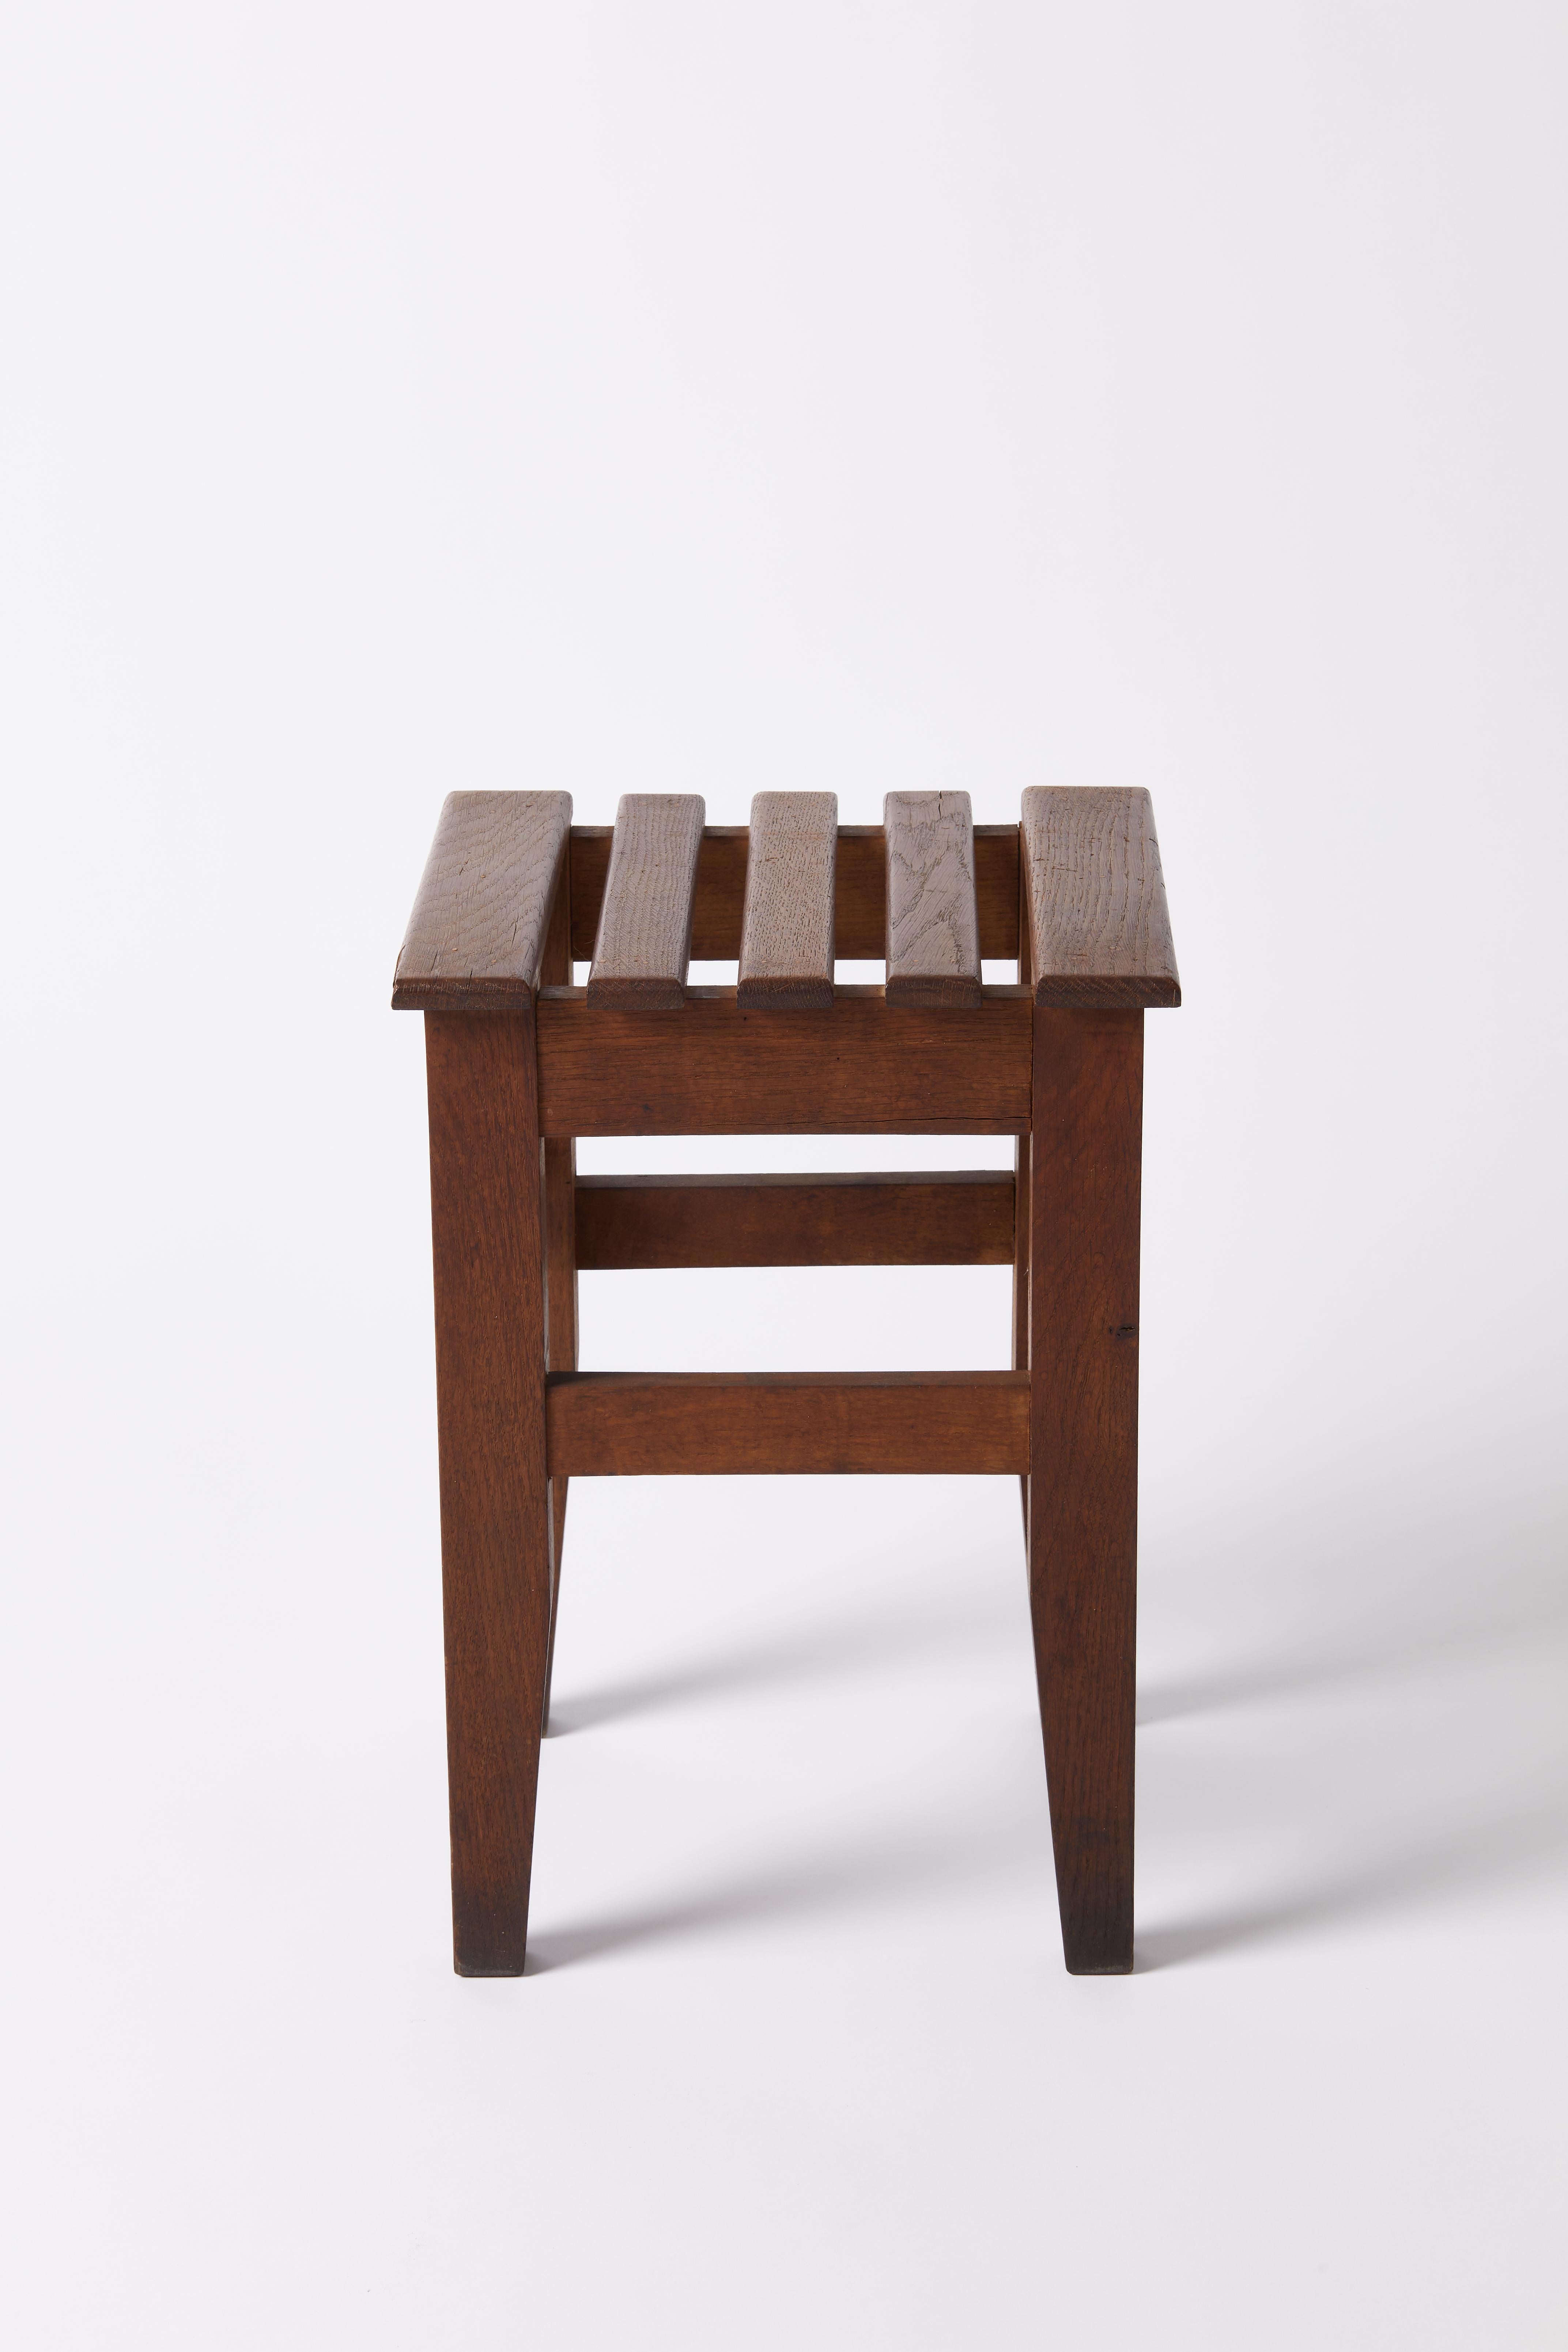 French Wood Stool, France, 20th C For Sale